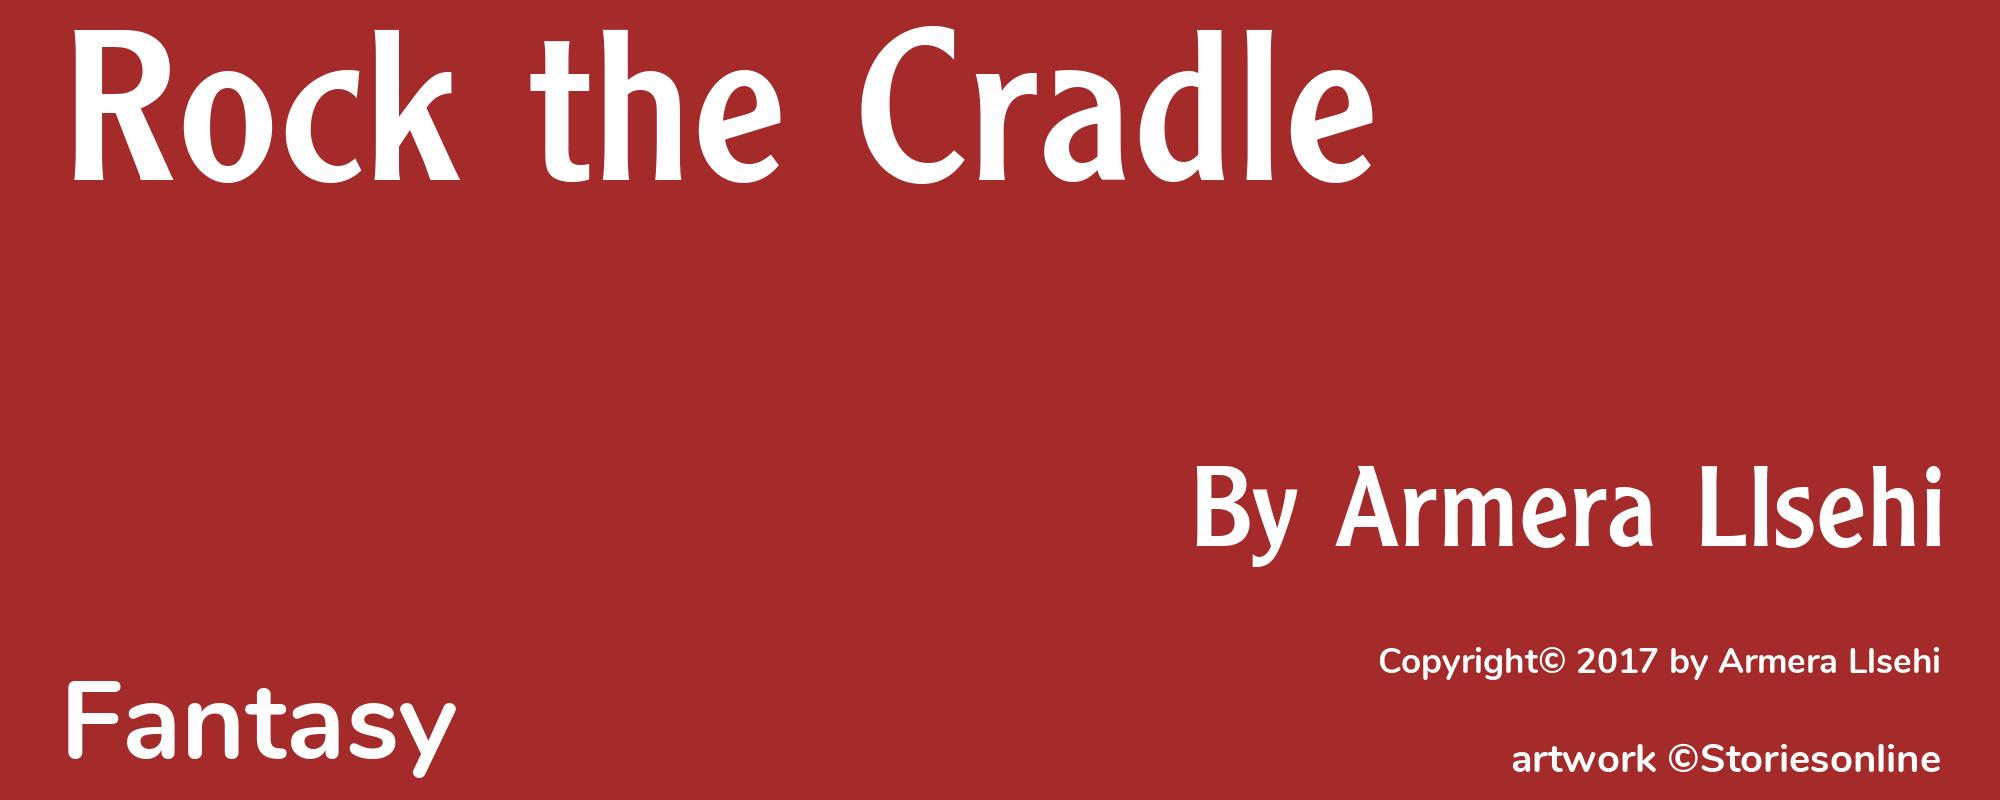 Rock the Cradle - Cover